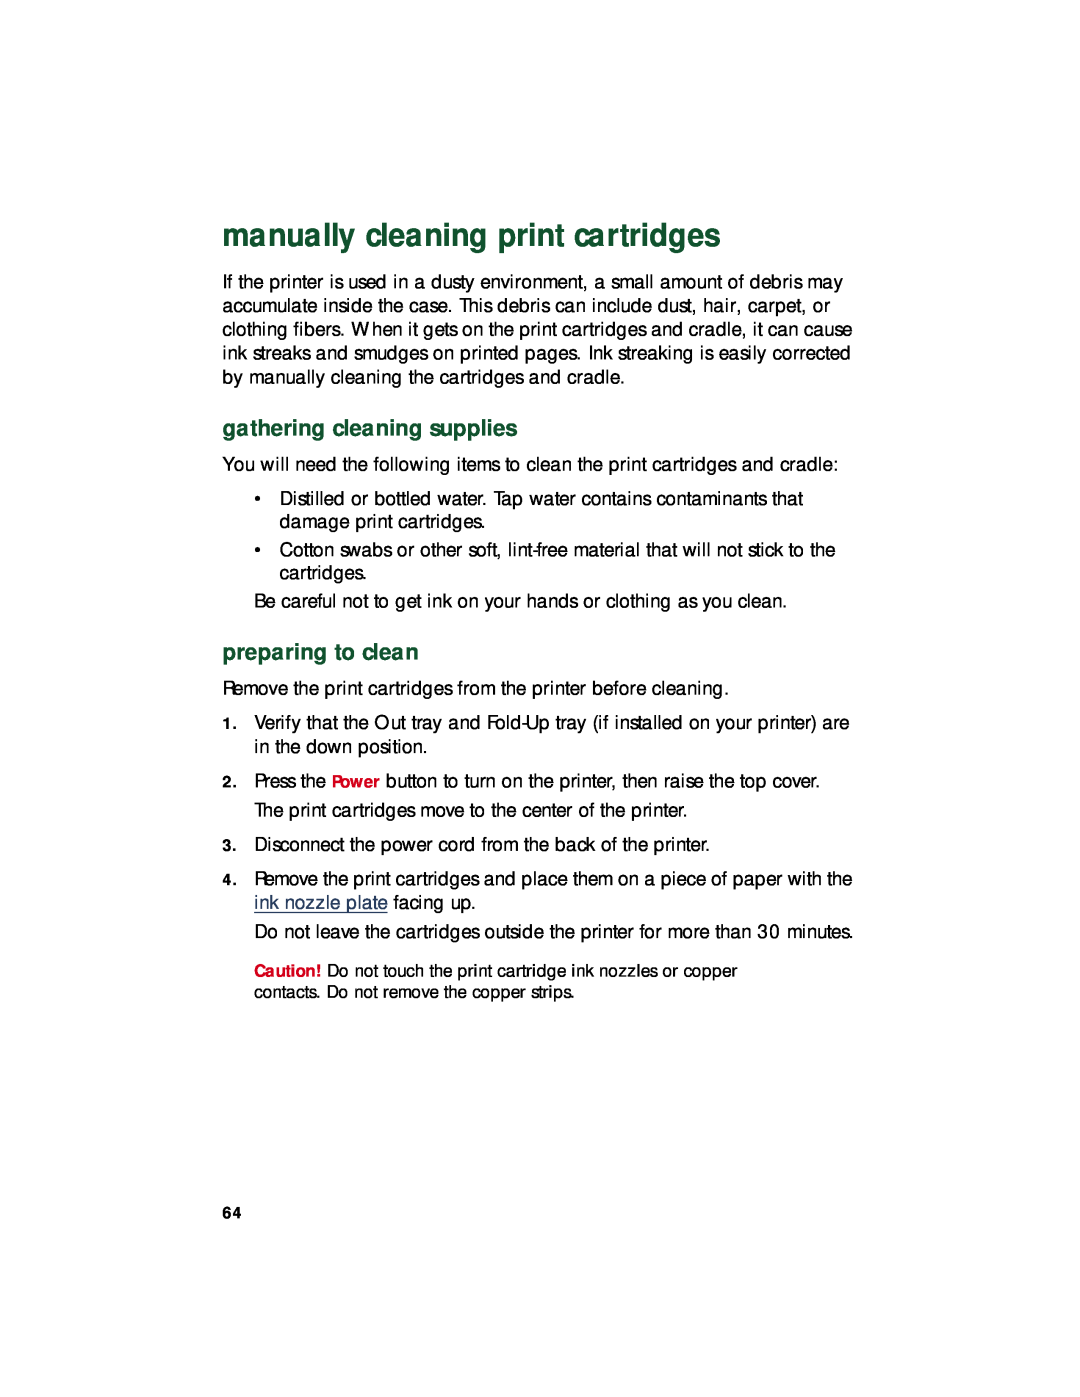 HP 920c, 948c, 940c manually cleaning print cartridges, gathering cleaning supplies, preparing to clean 